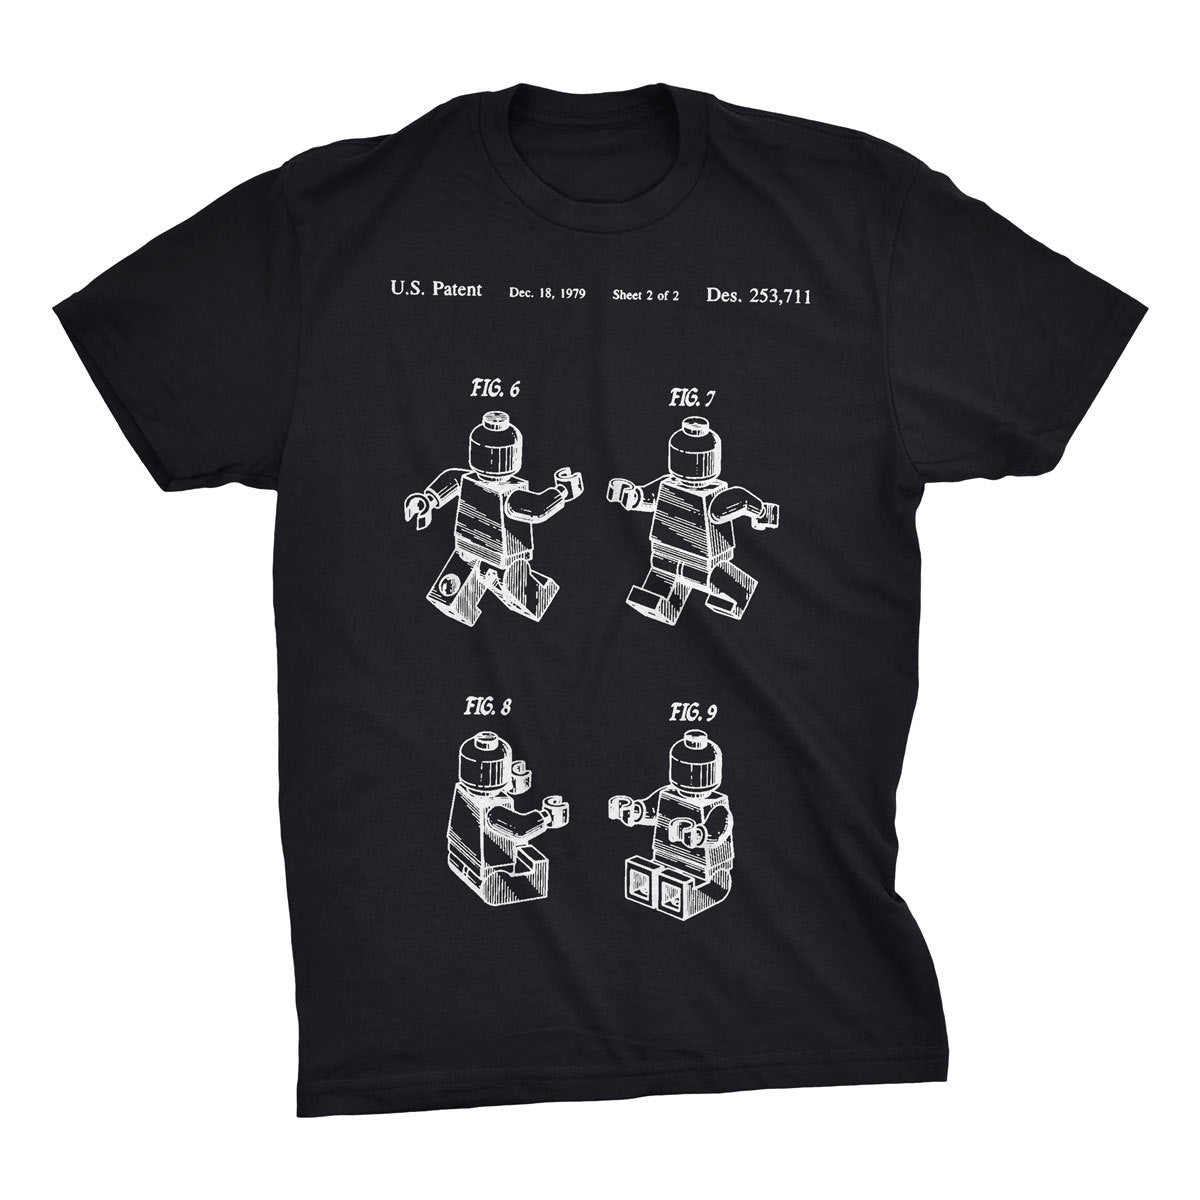 Lego Man Patent T-Shirt. Lego Patent - Mighty Circus